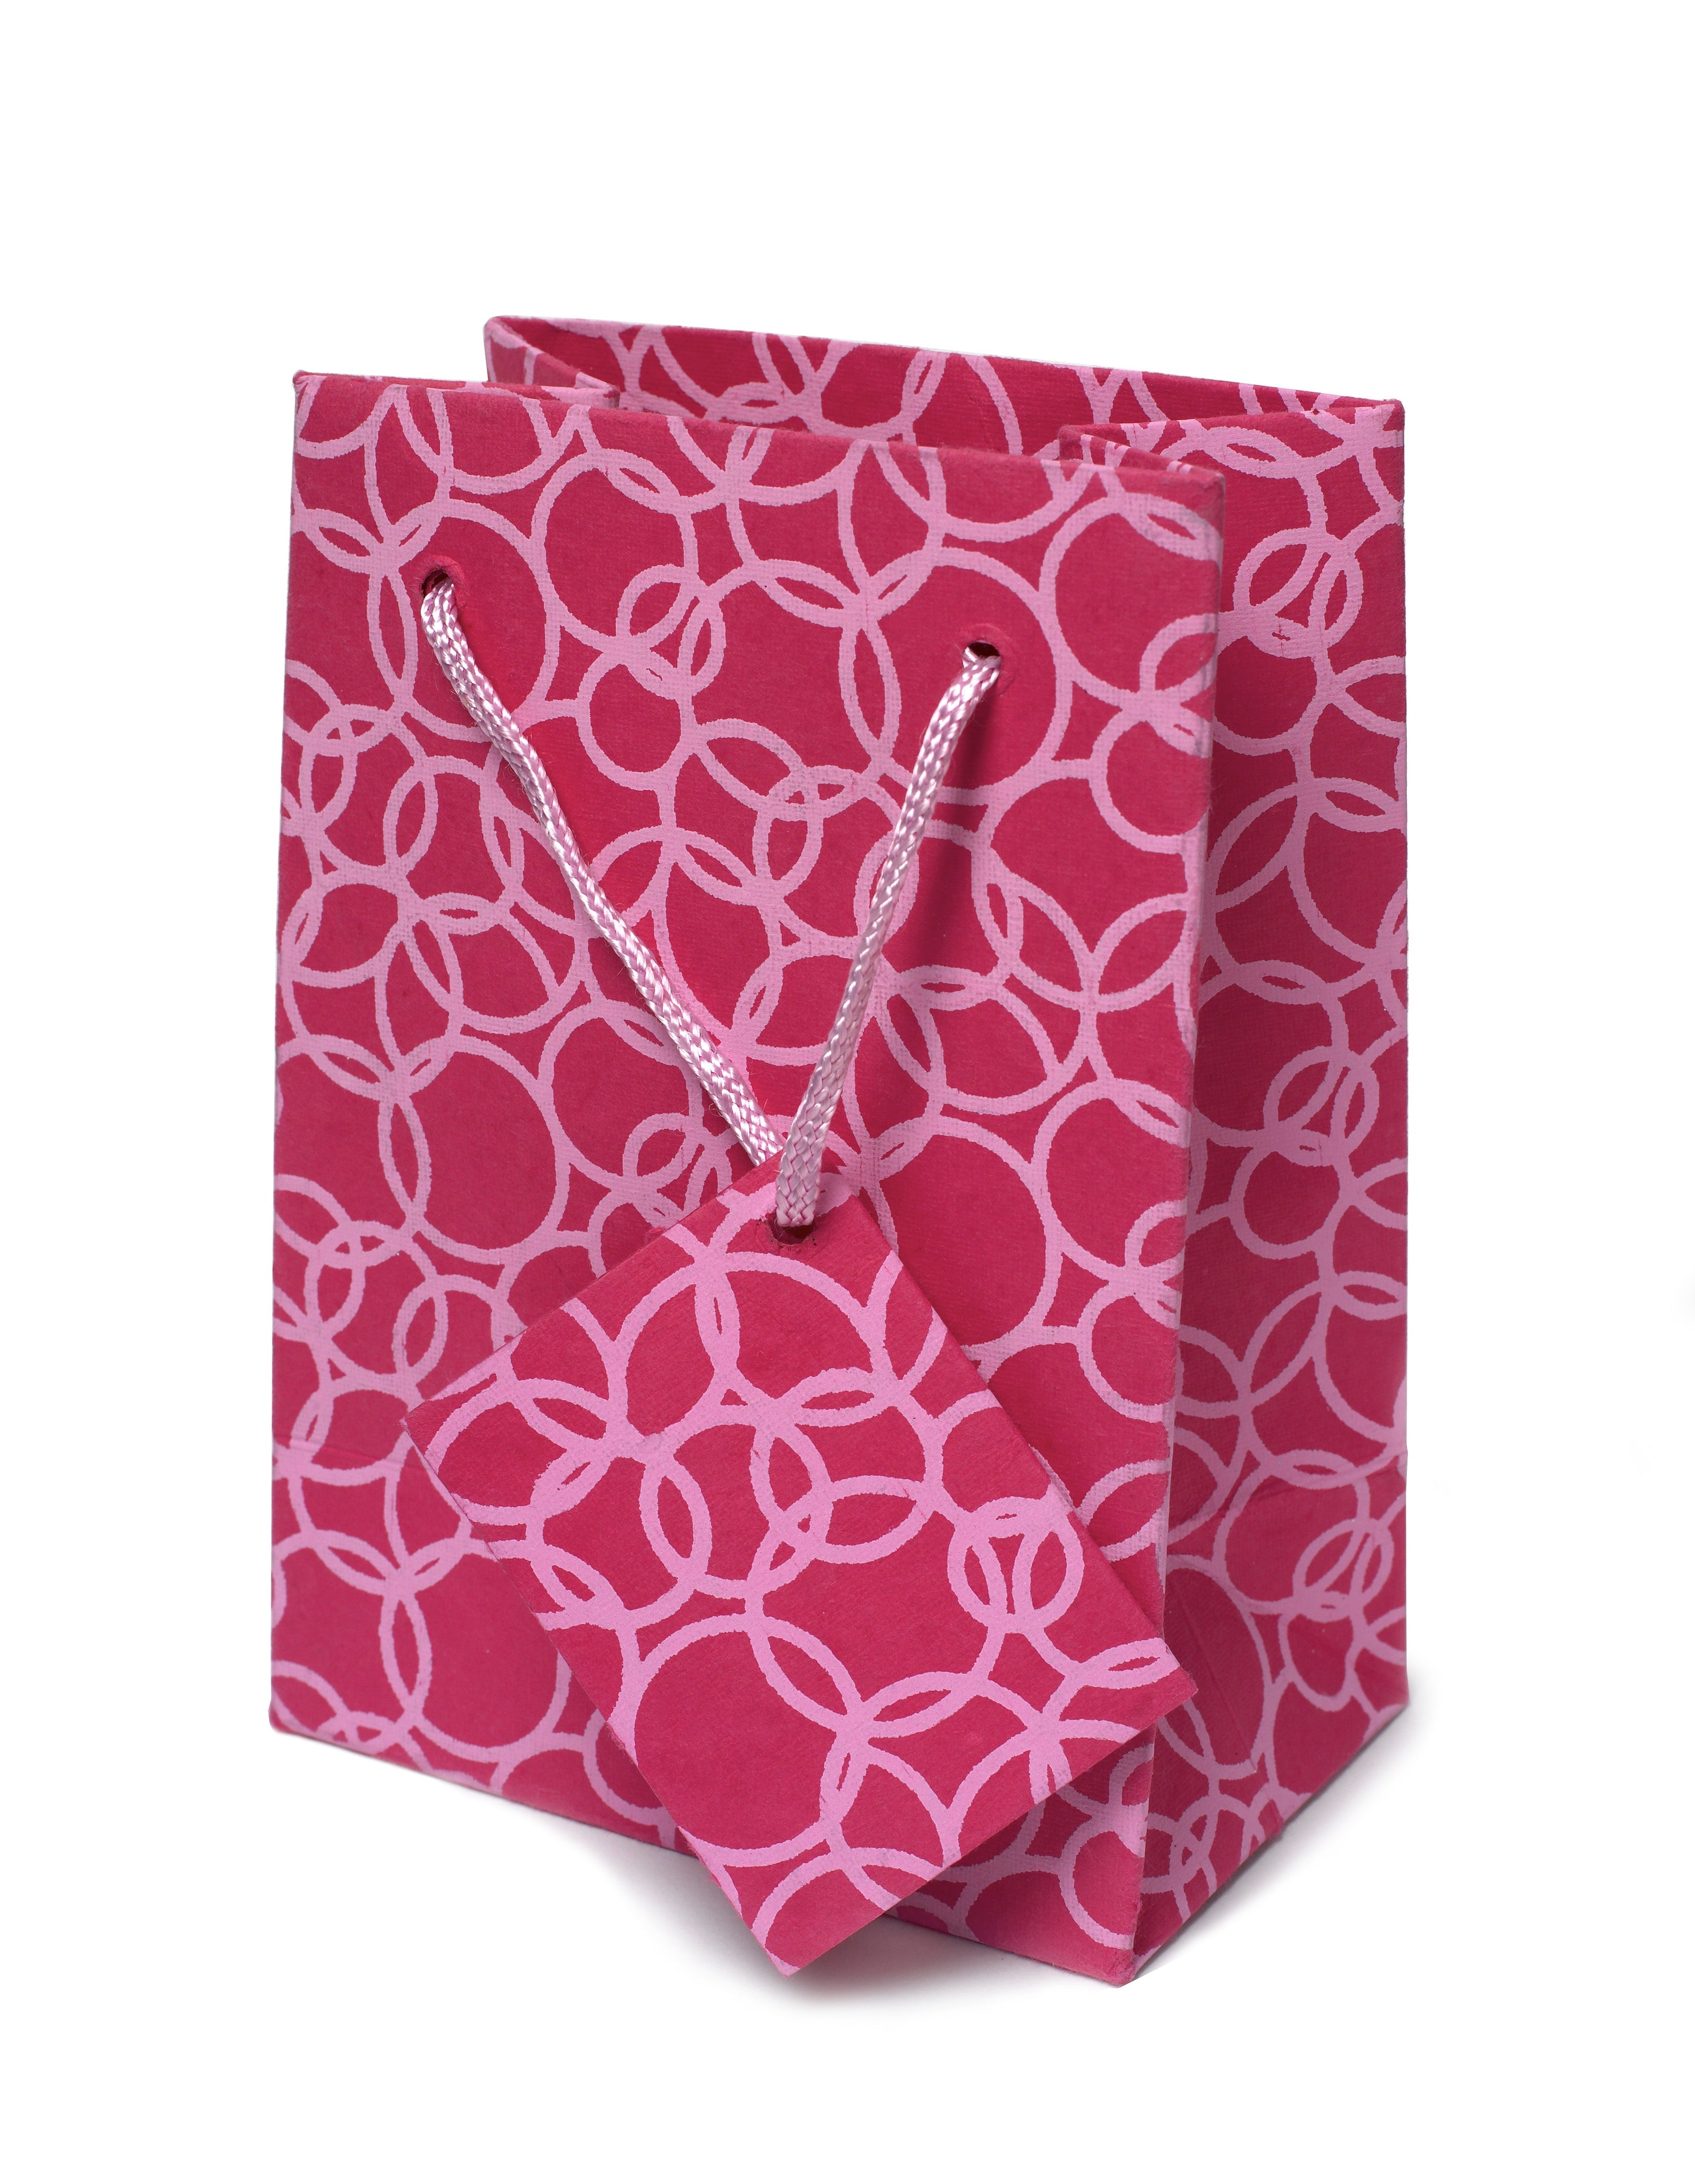 Set Of Six Recycled Cotton Gift Bags With Tag In Pink Circles Design